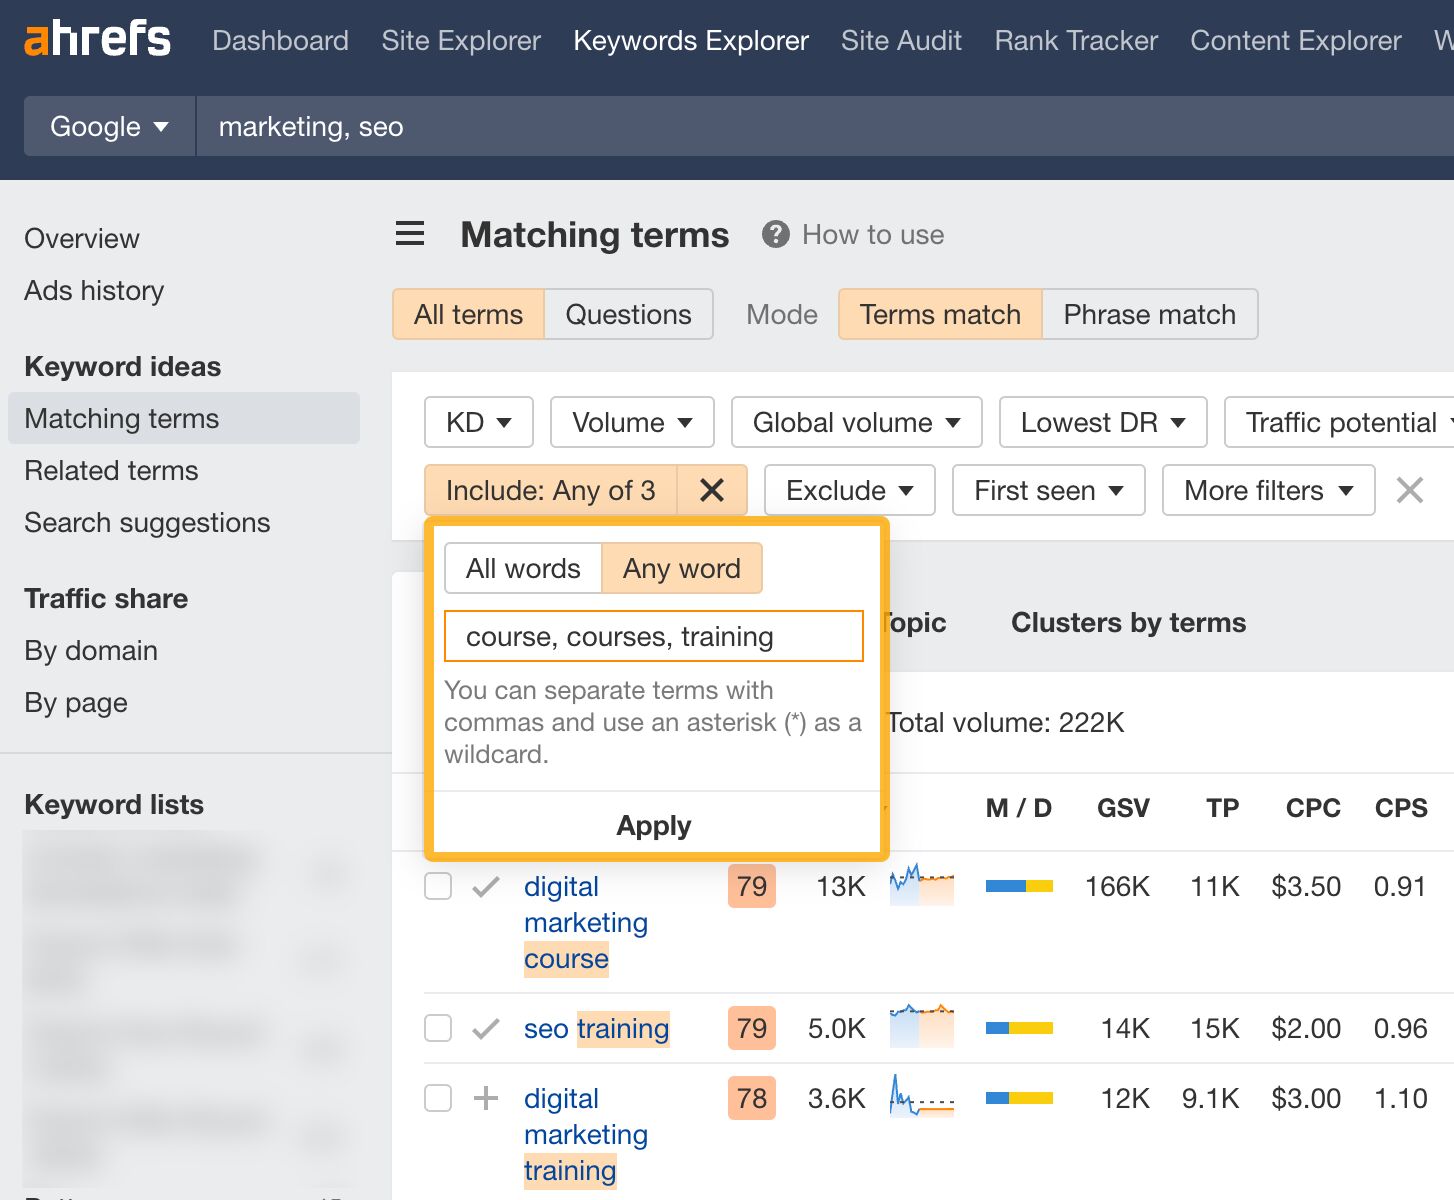 Finding course-related keywords in Keywords Explorer